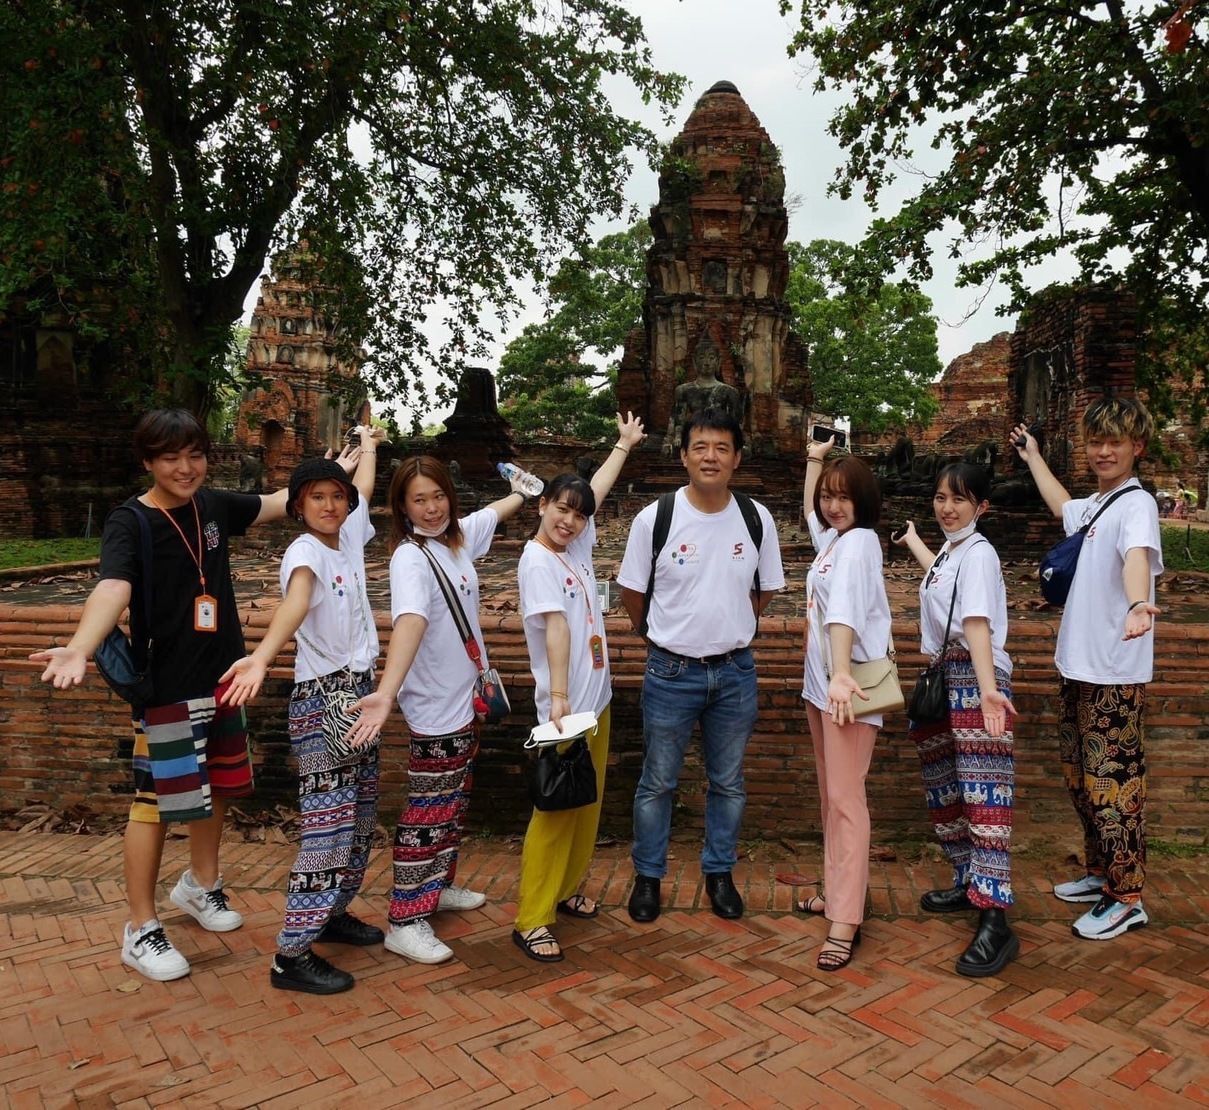 Japanese students from Tokai University, Tokyo and Thai student exchange program enjoyed learning Thai culture by visiting Ayudhaya together.